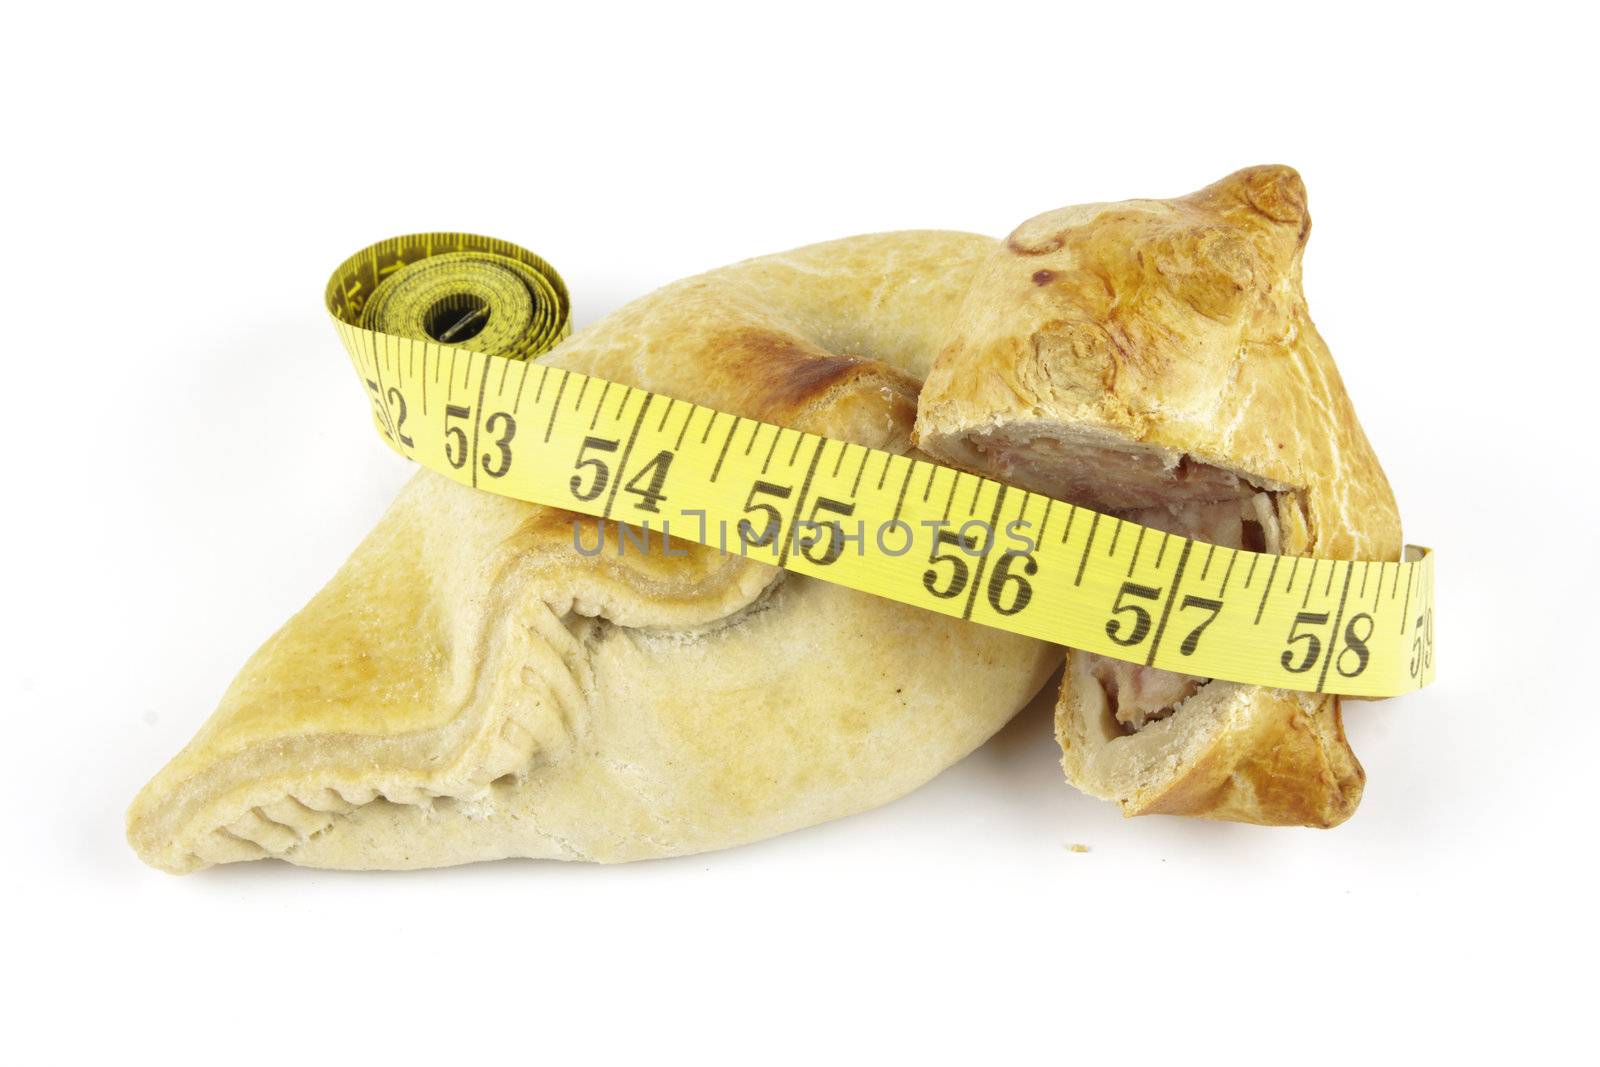 Single golden pasty with pork pie and yellow tape measure on a reflective white background